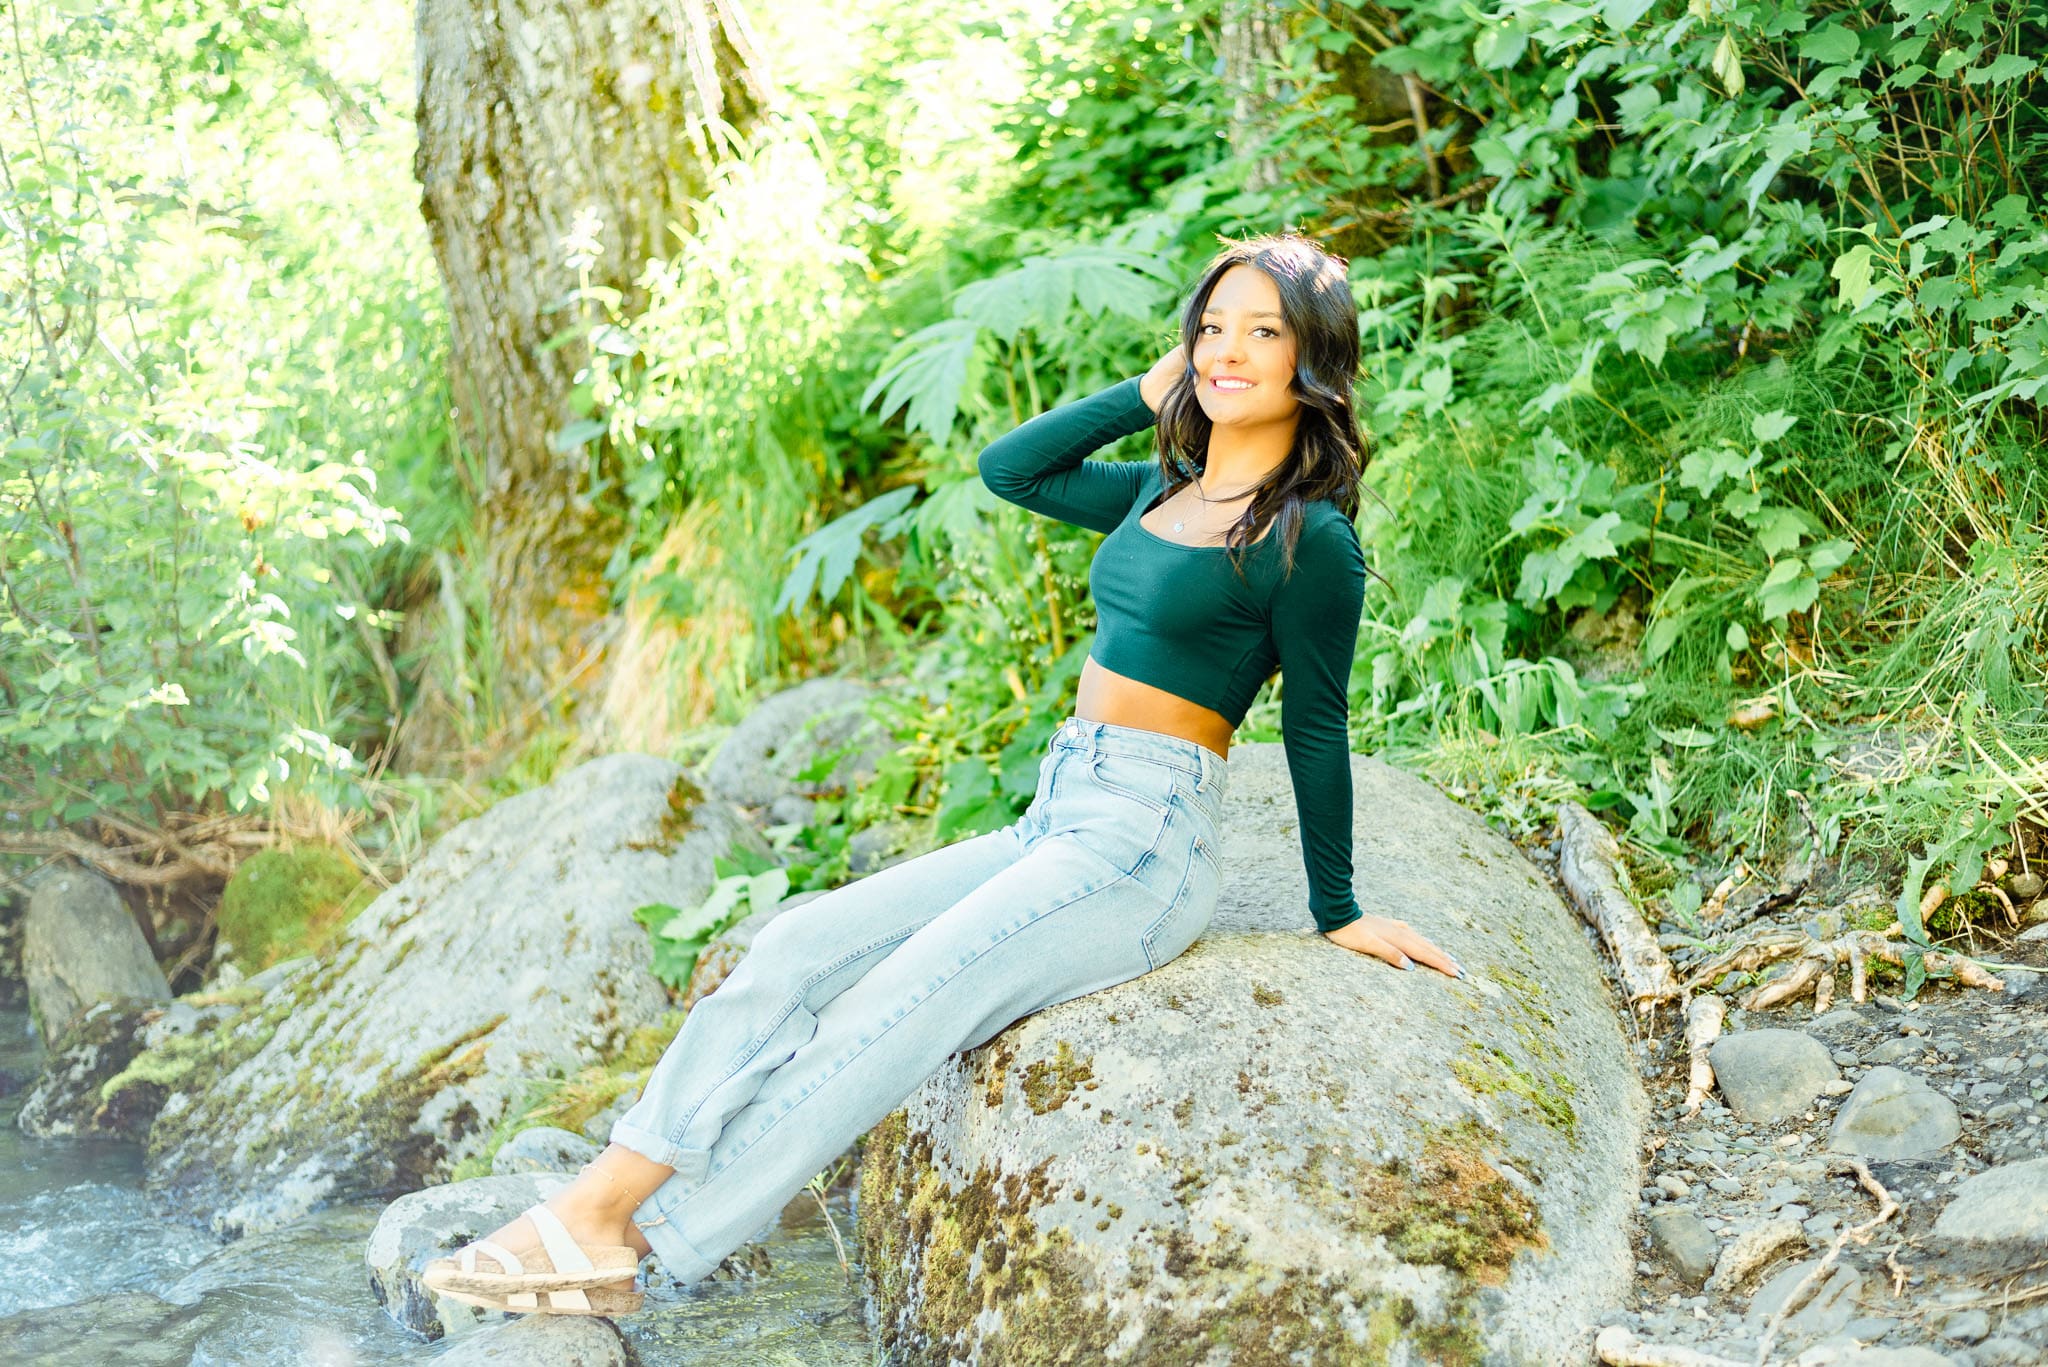 girl sitting on a rock with greenery and trees behind her